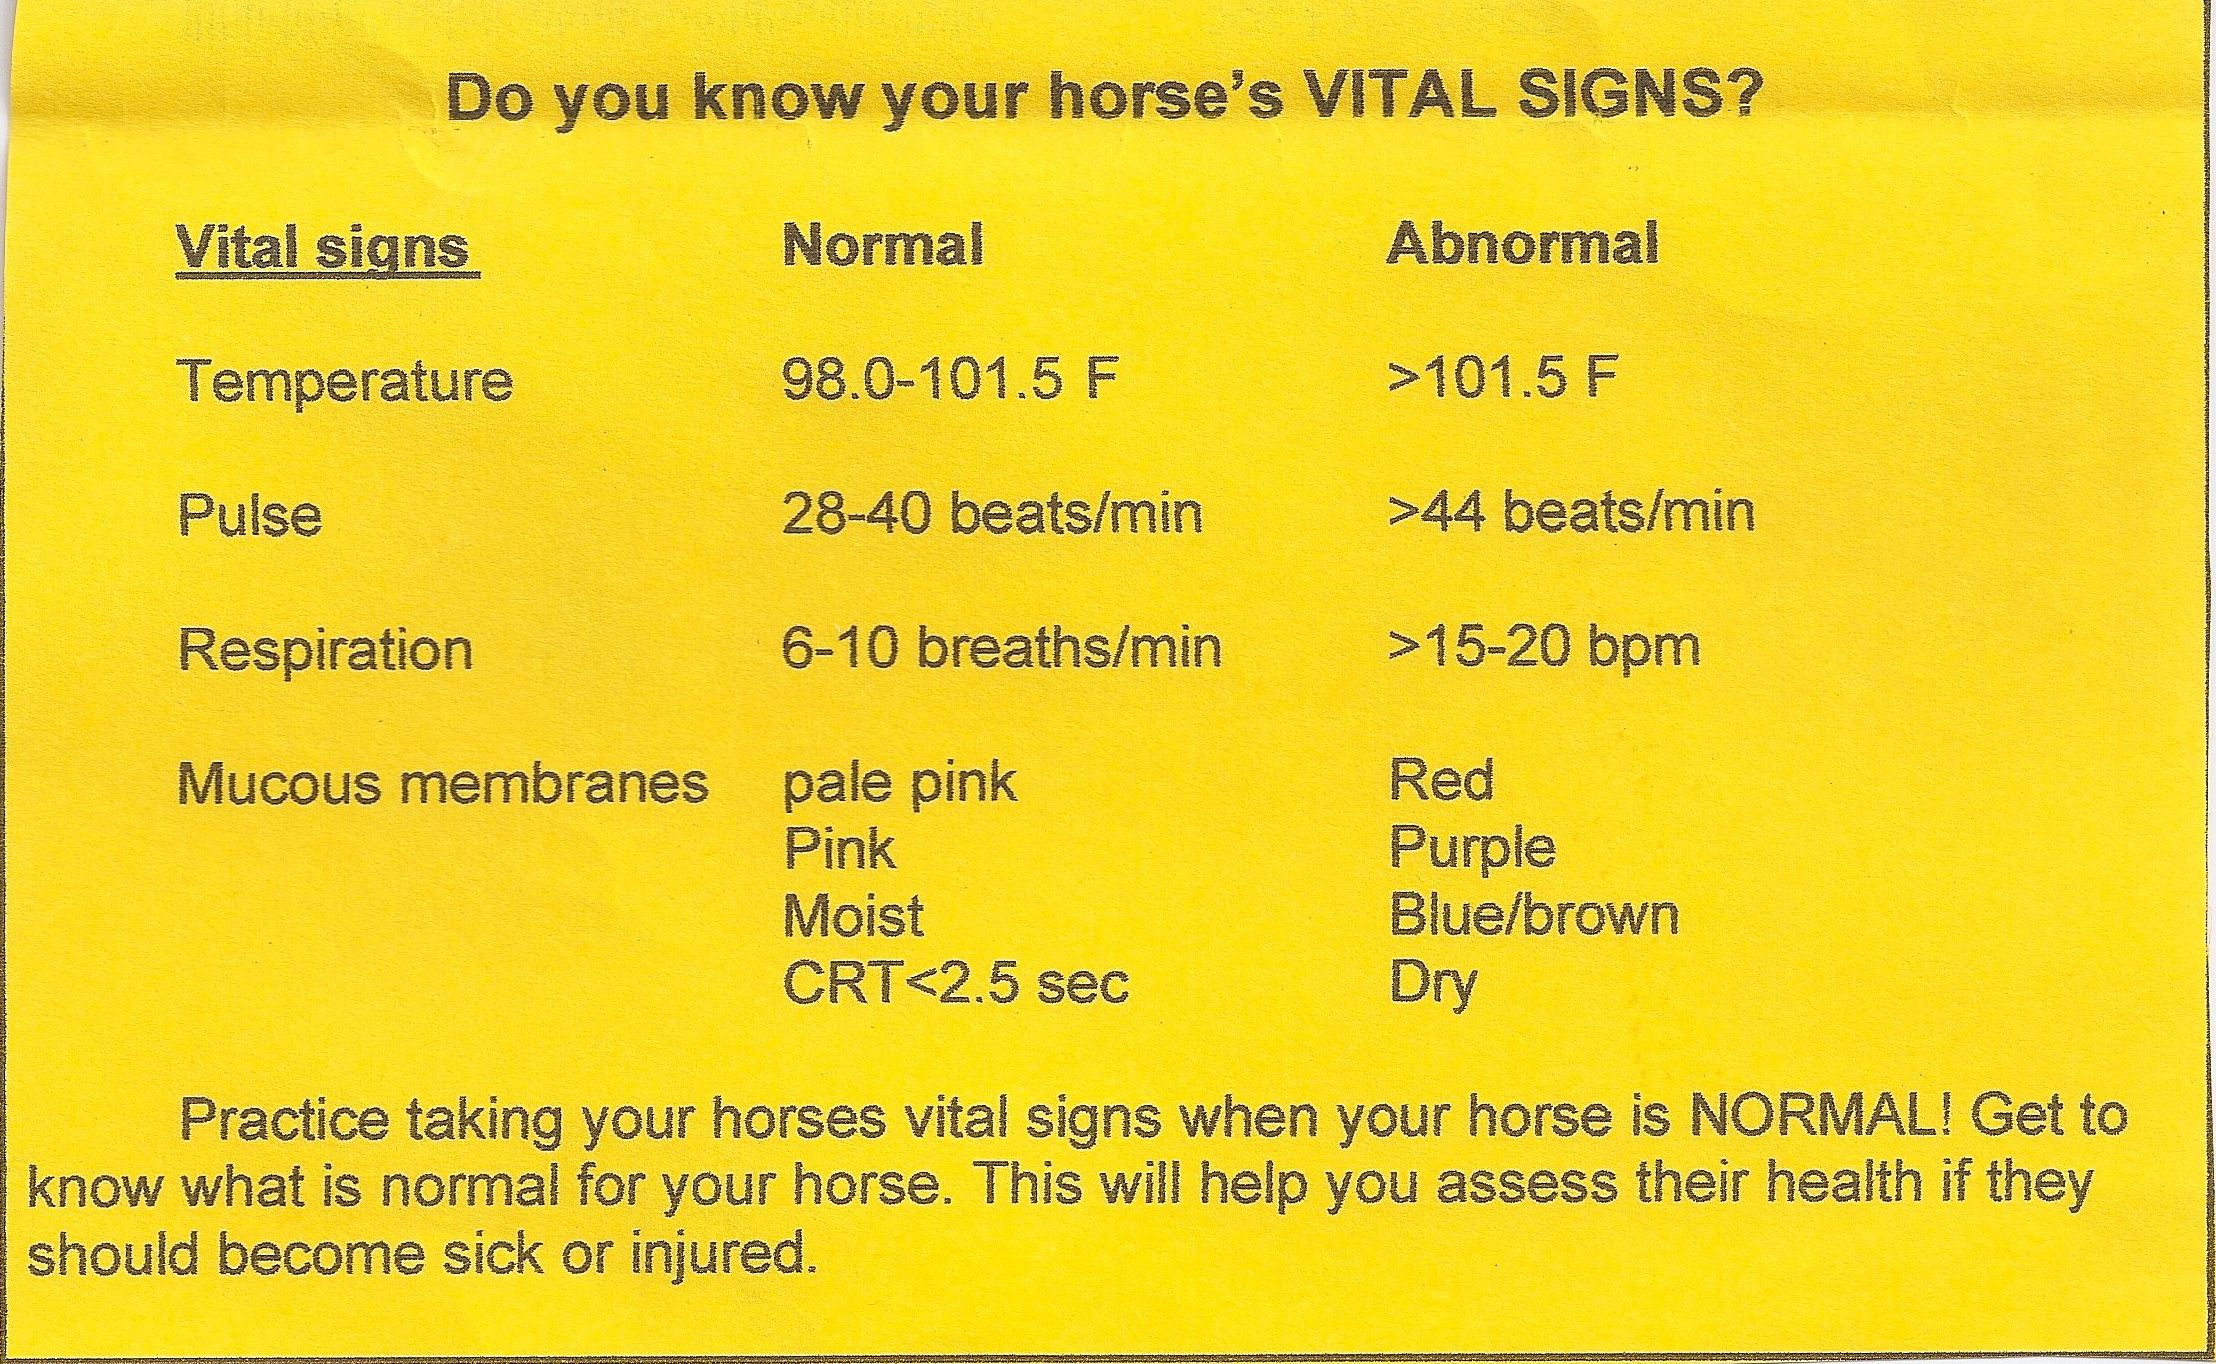 HORSE'S VITAL SIGNS